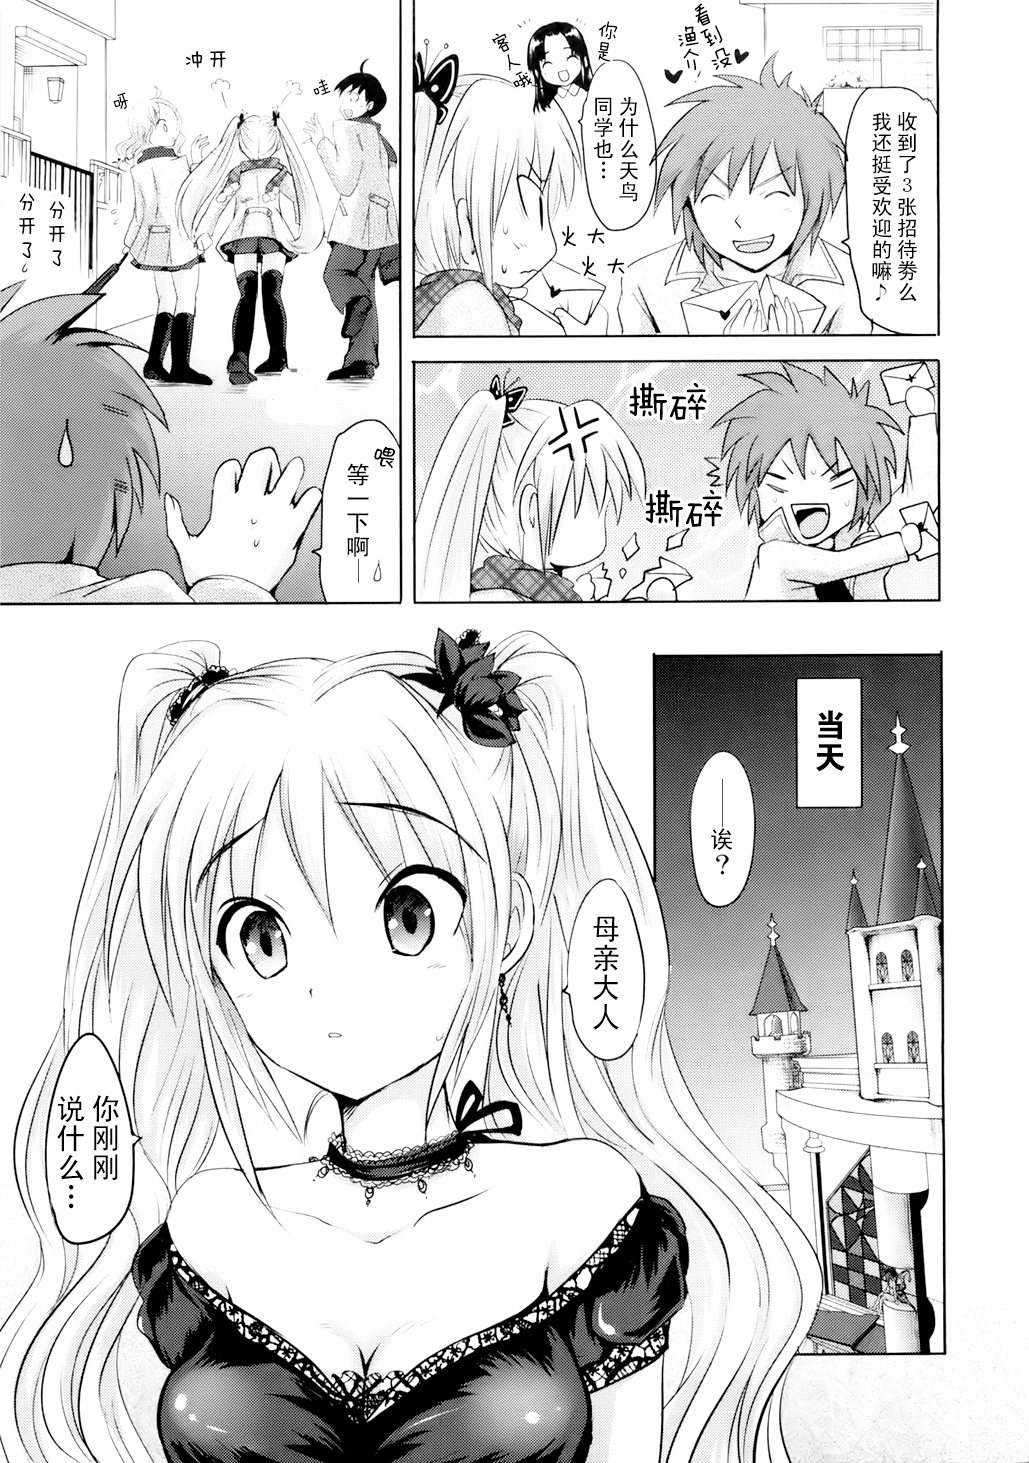 [Natsume Fumika] Sundere! Ch.7 [Chinese] [夏目文花] スンデレ! CH7 [中文翻譯]